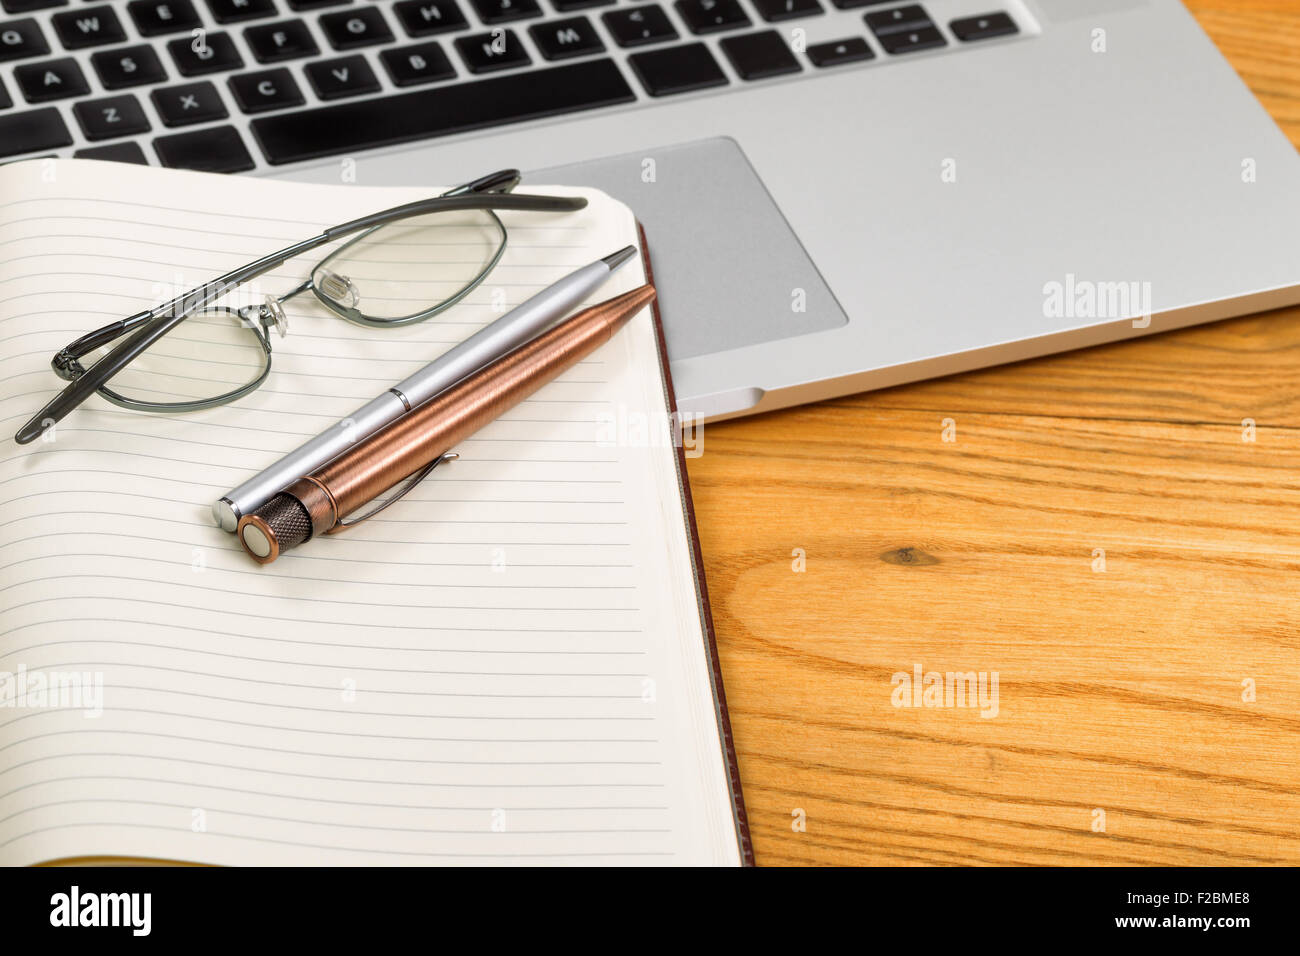 Close up of pens, selective focus on pens, with open blank notebook, reading glasses, and computer in background on desktop. Stock Photo